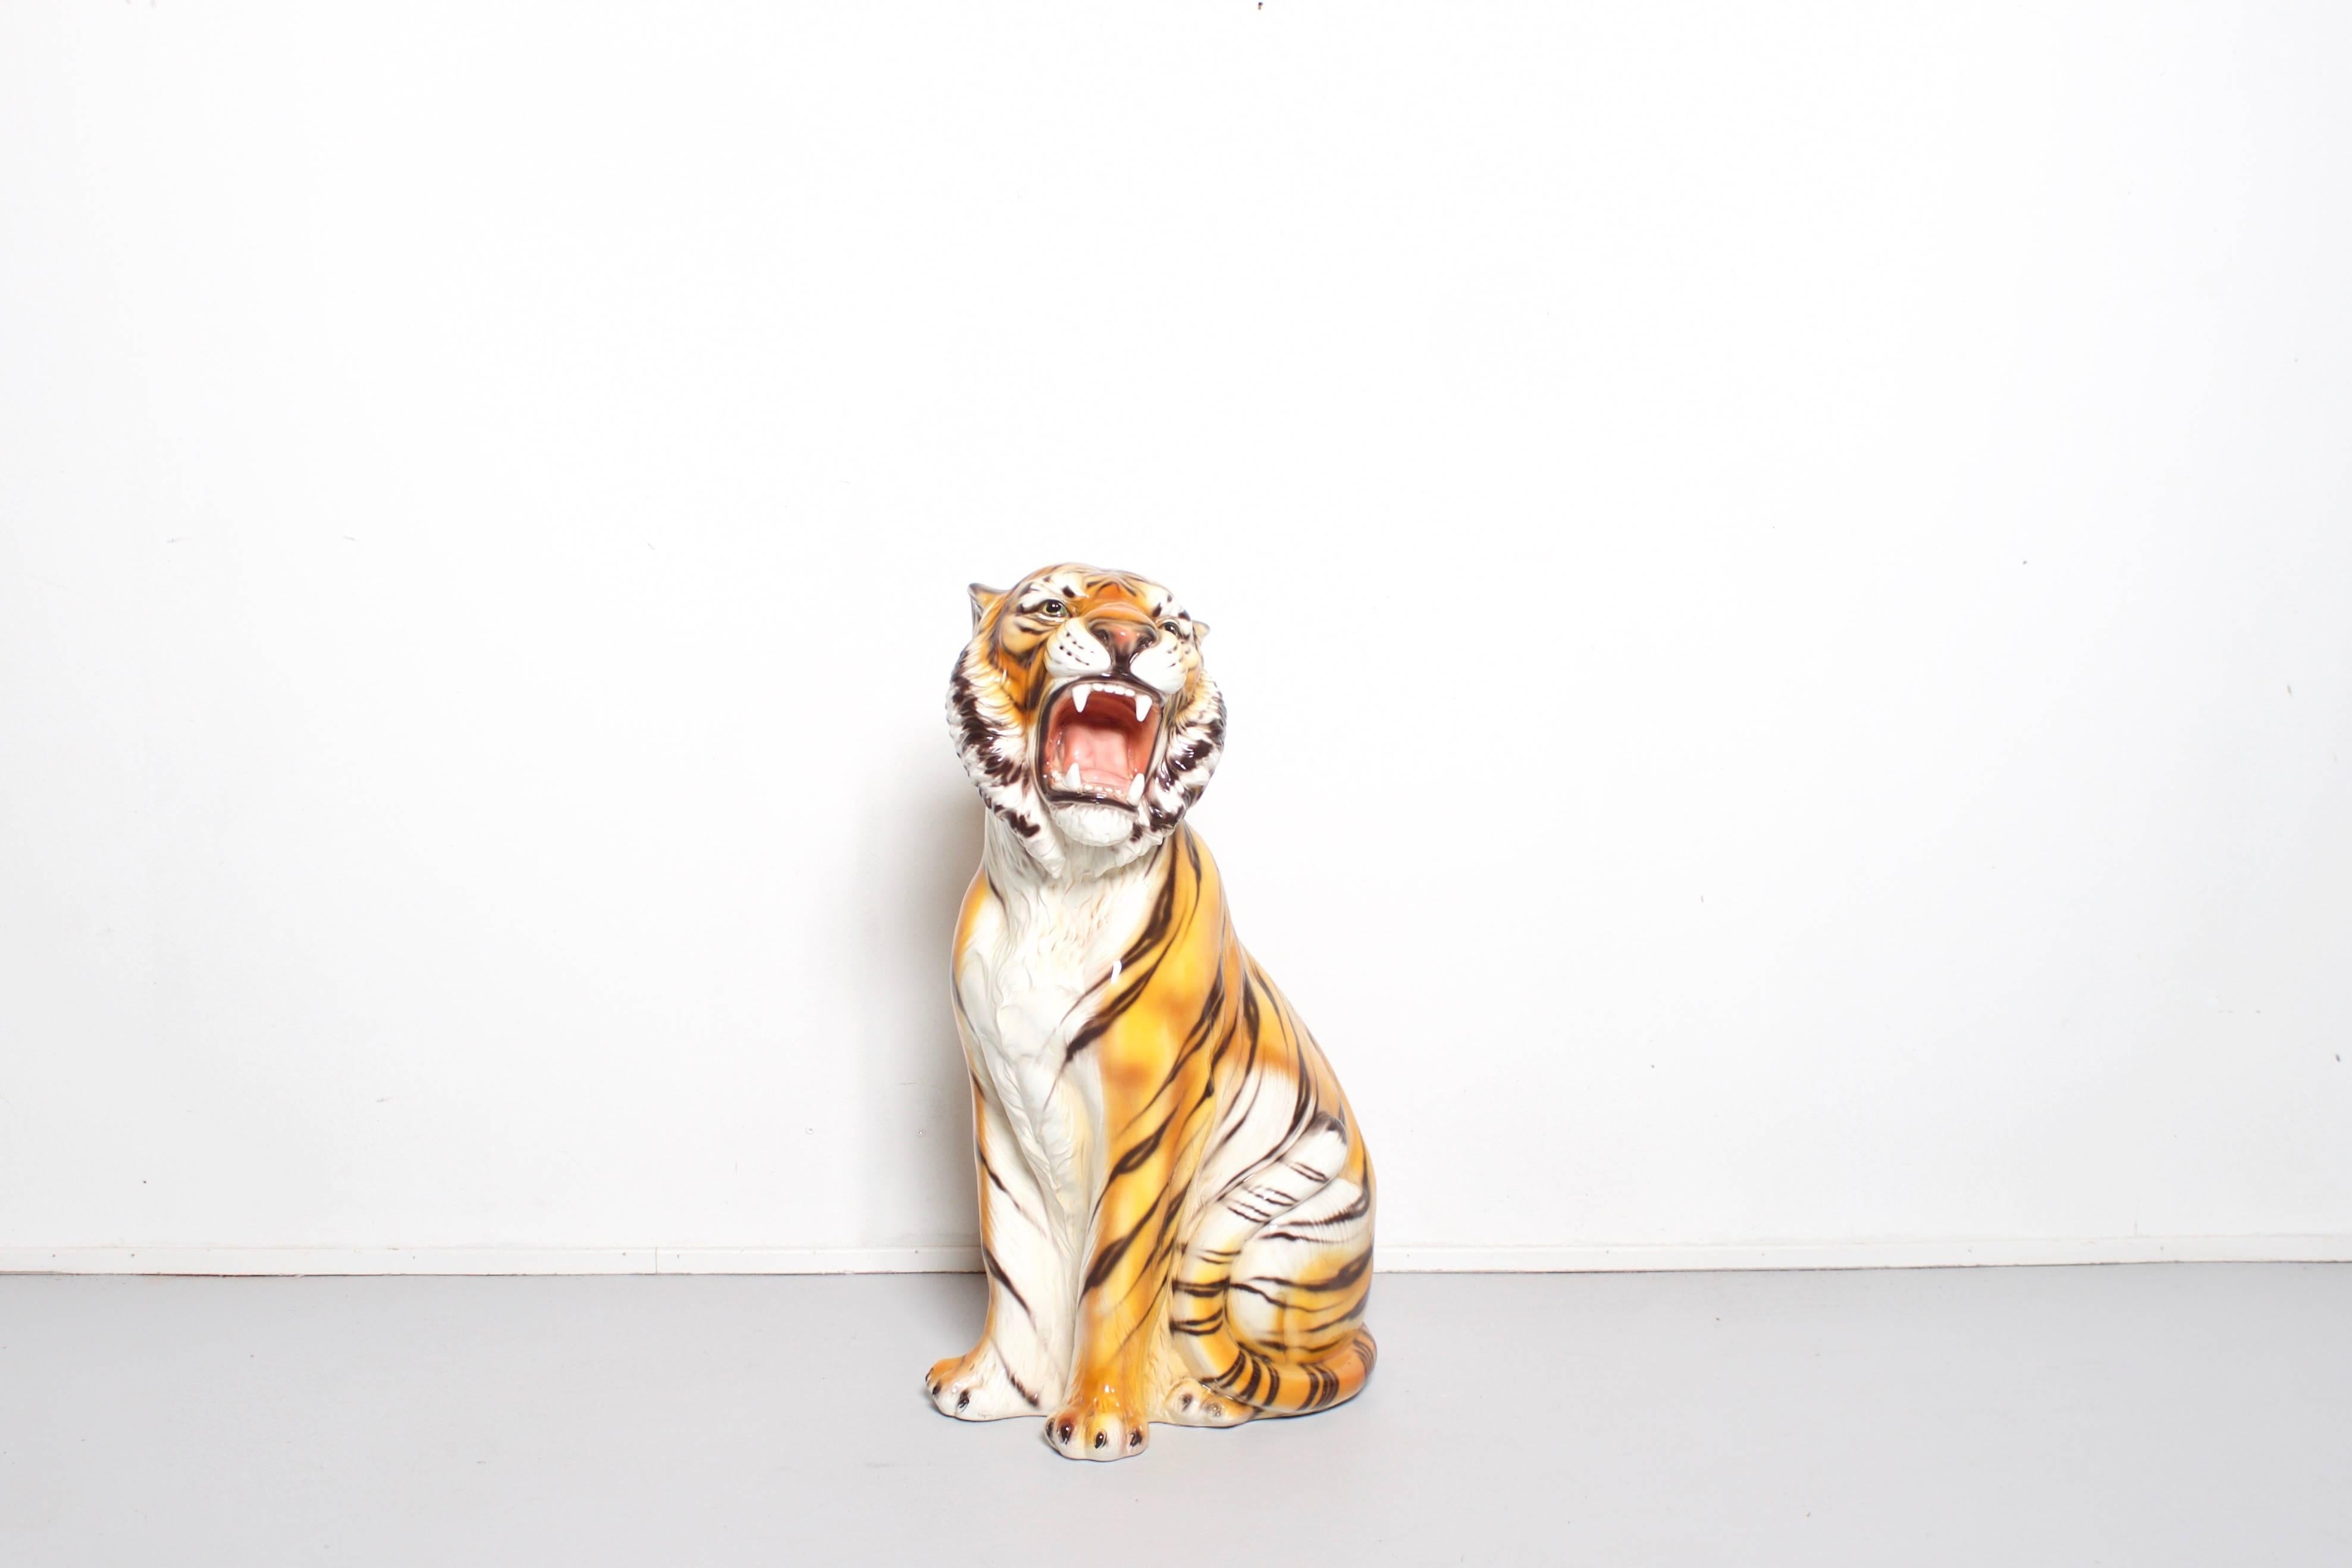 Stunning vintage tiger statue with a very realistic expression and vibrant colors.

This Tiger is handprinted and made in Italy in the 1960s

On the bottom of the statue it is stamped ‘hand painted, made in Italy’

This statue is in very good